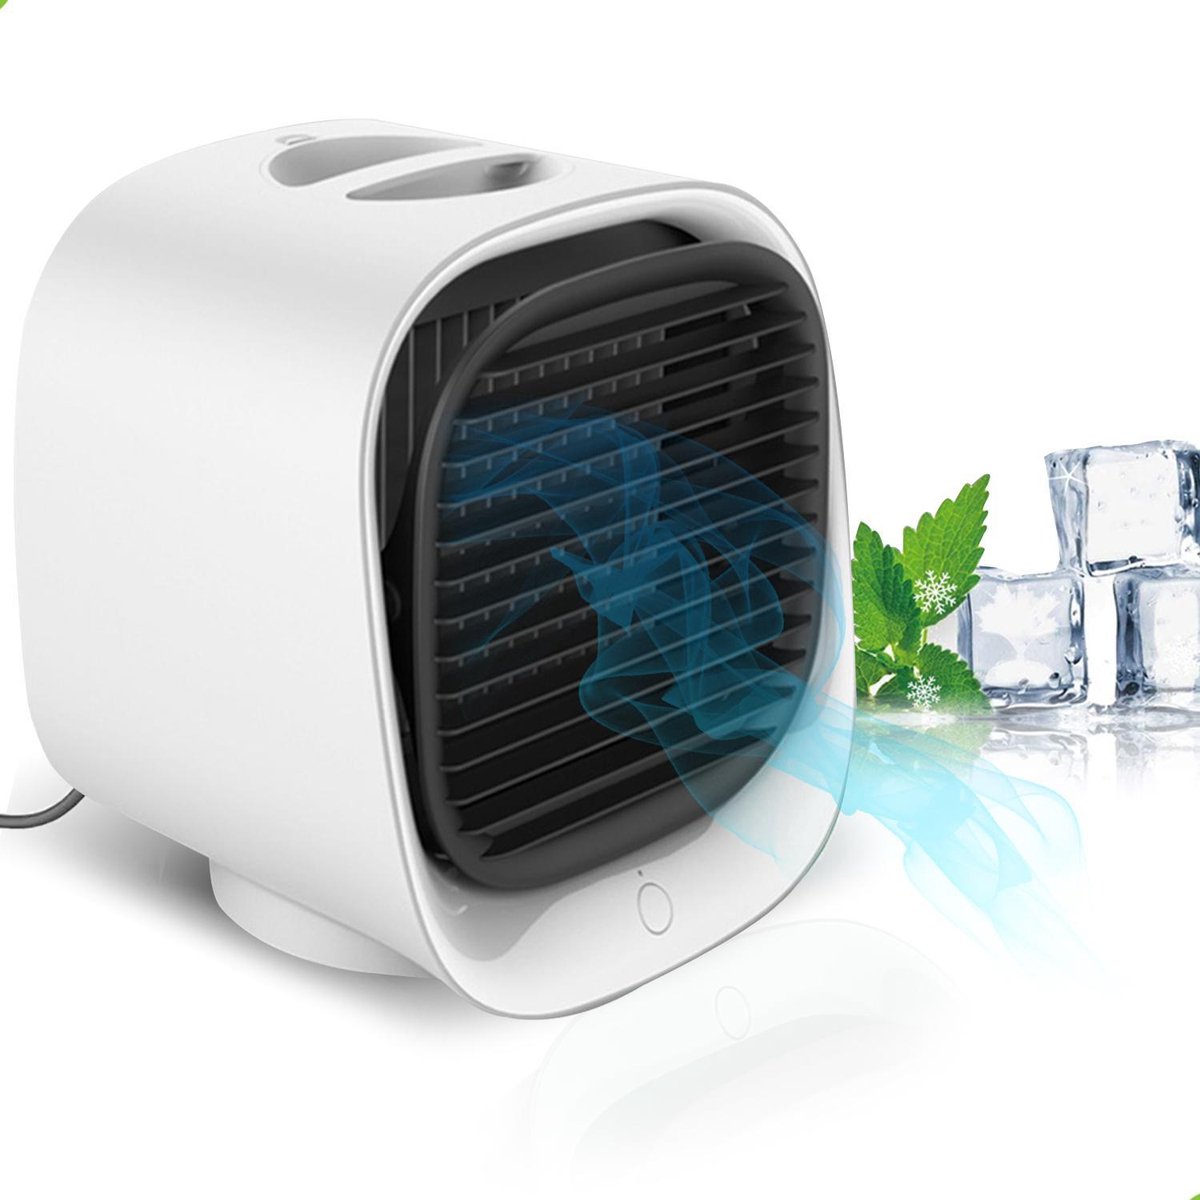 Exclusive by TW Aircooler - Ventilator - Airco - Mobiele Airco - Tafelventilator - Aircooler - Luchtkoeler - Wit